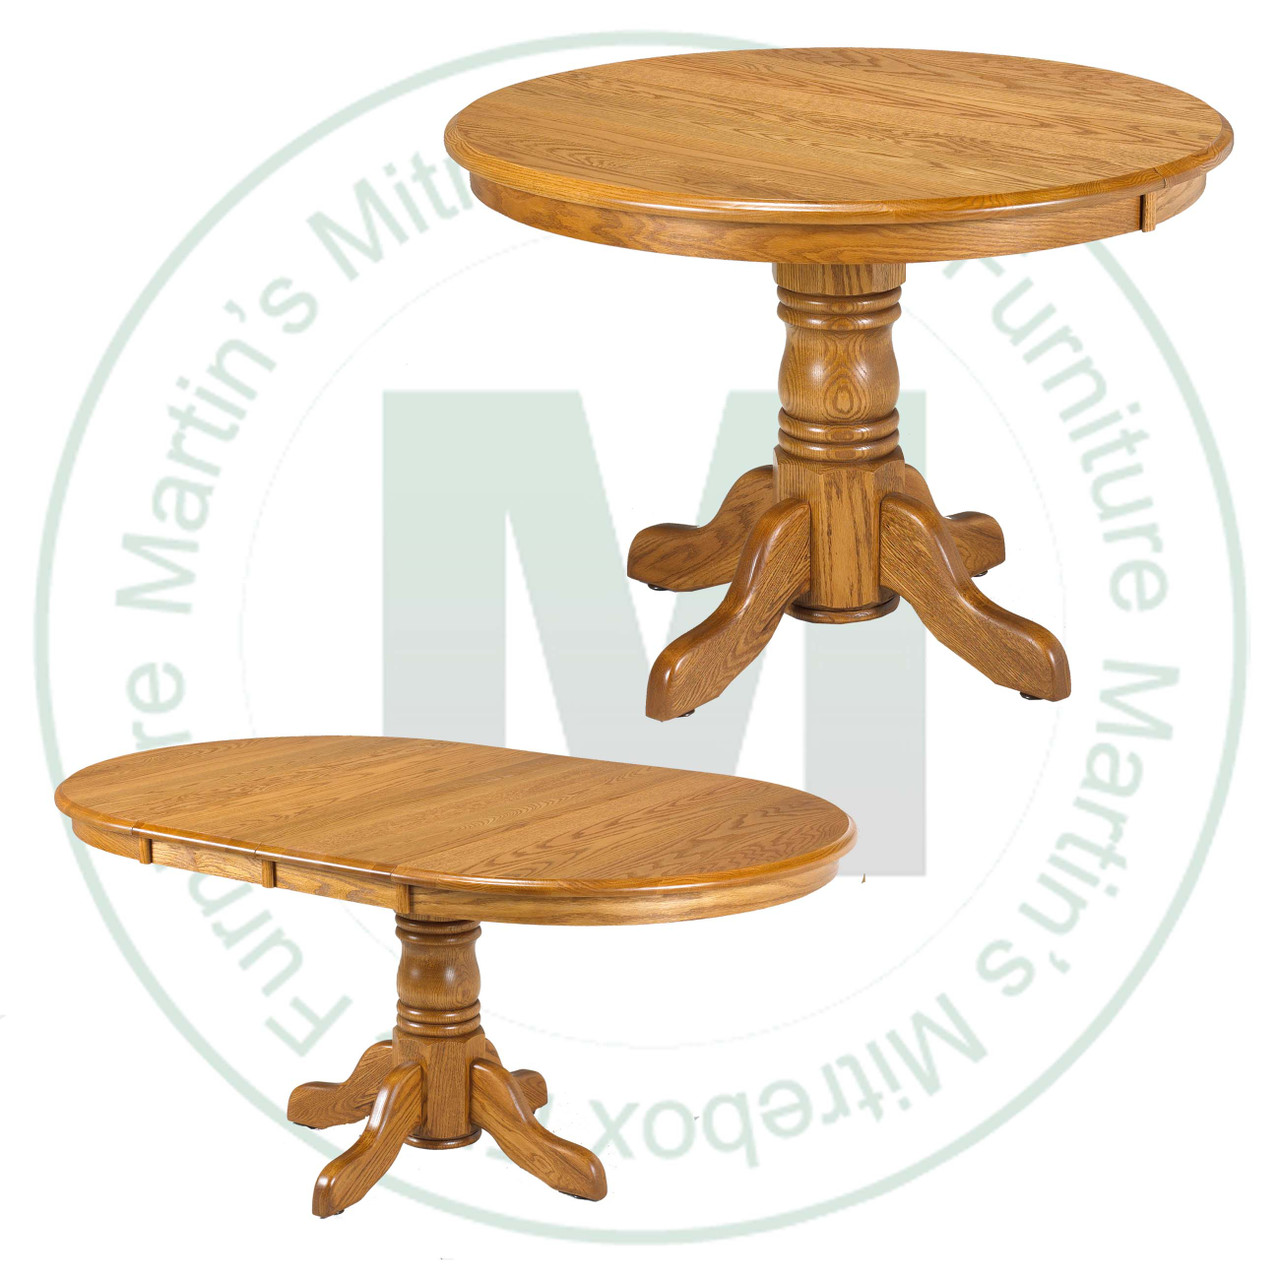 Wormy Maple Lancaster Collection Single Pedestal Table 36''D x 36''W x 30''H With 2 - 12'' Leaves. Table Has 1'' Thick Top